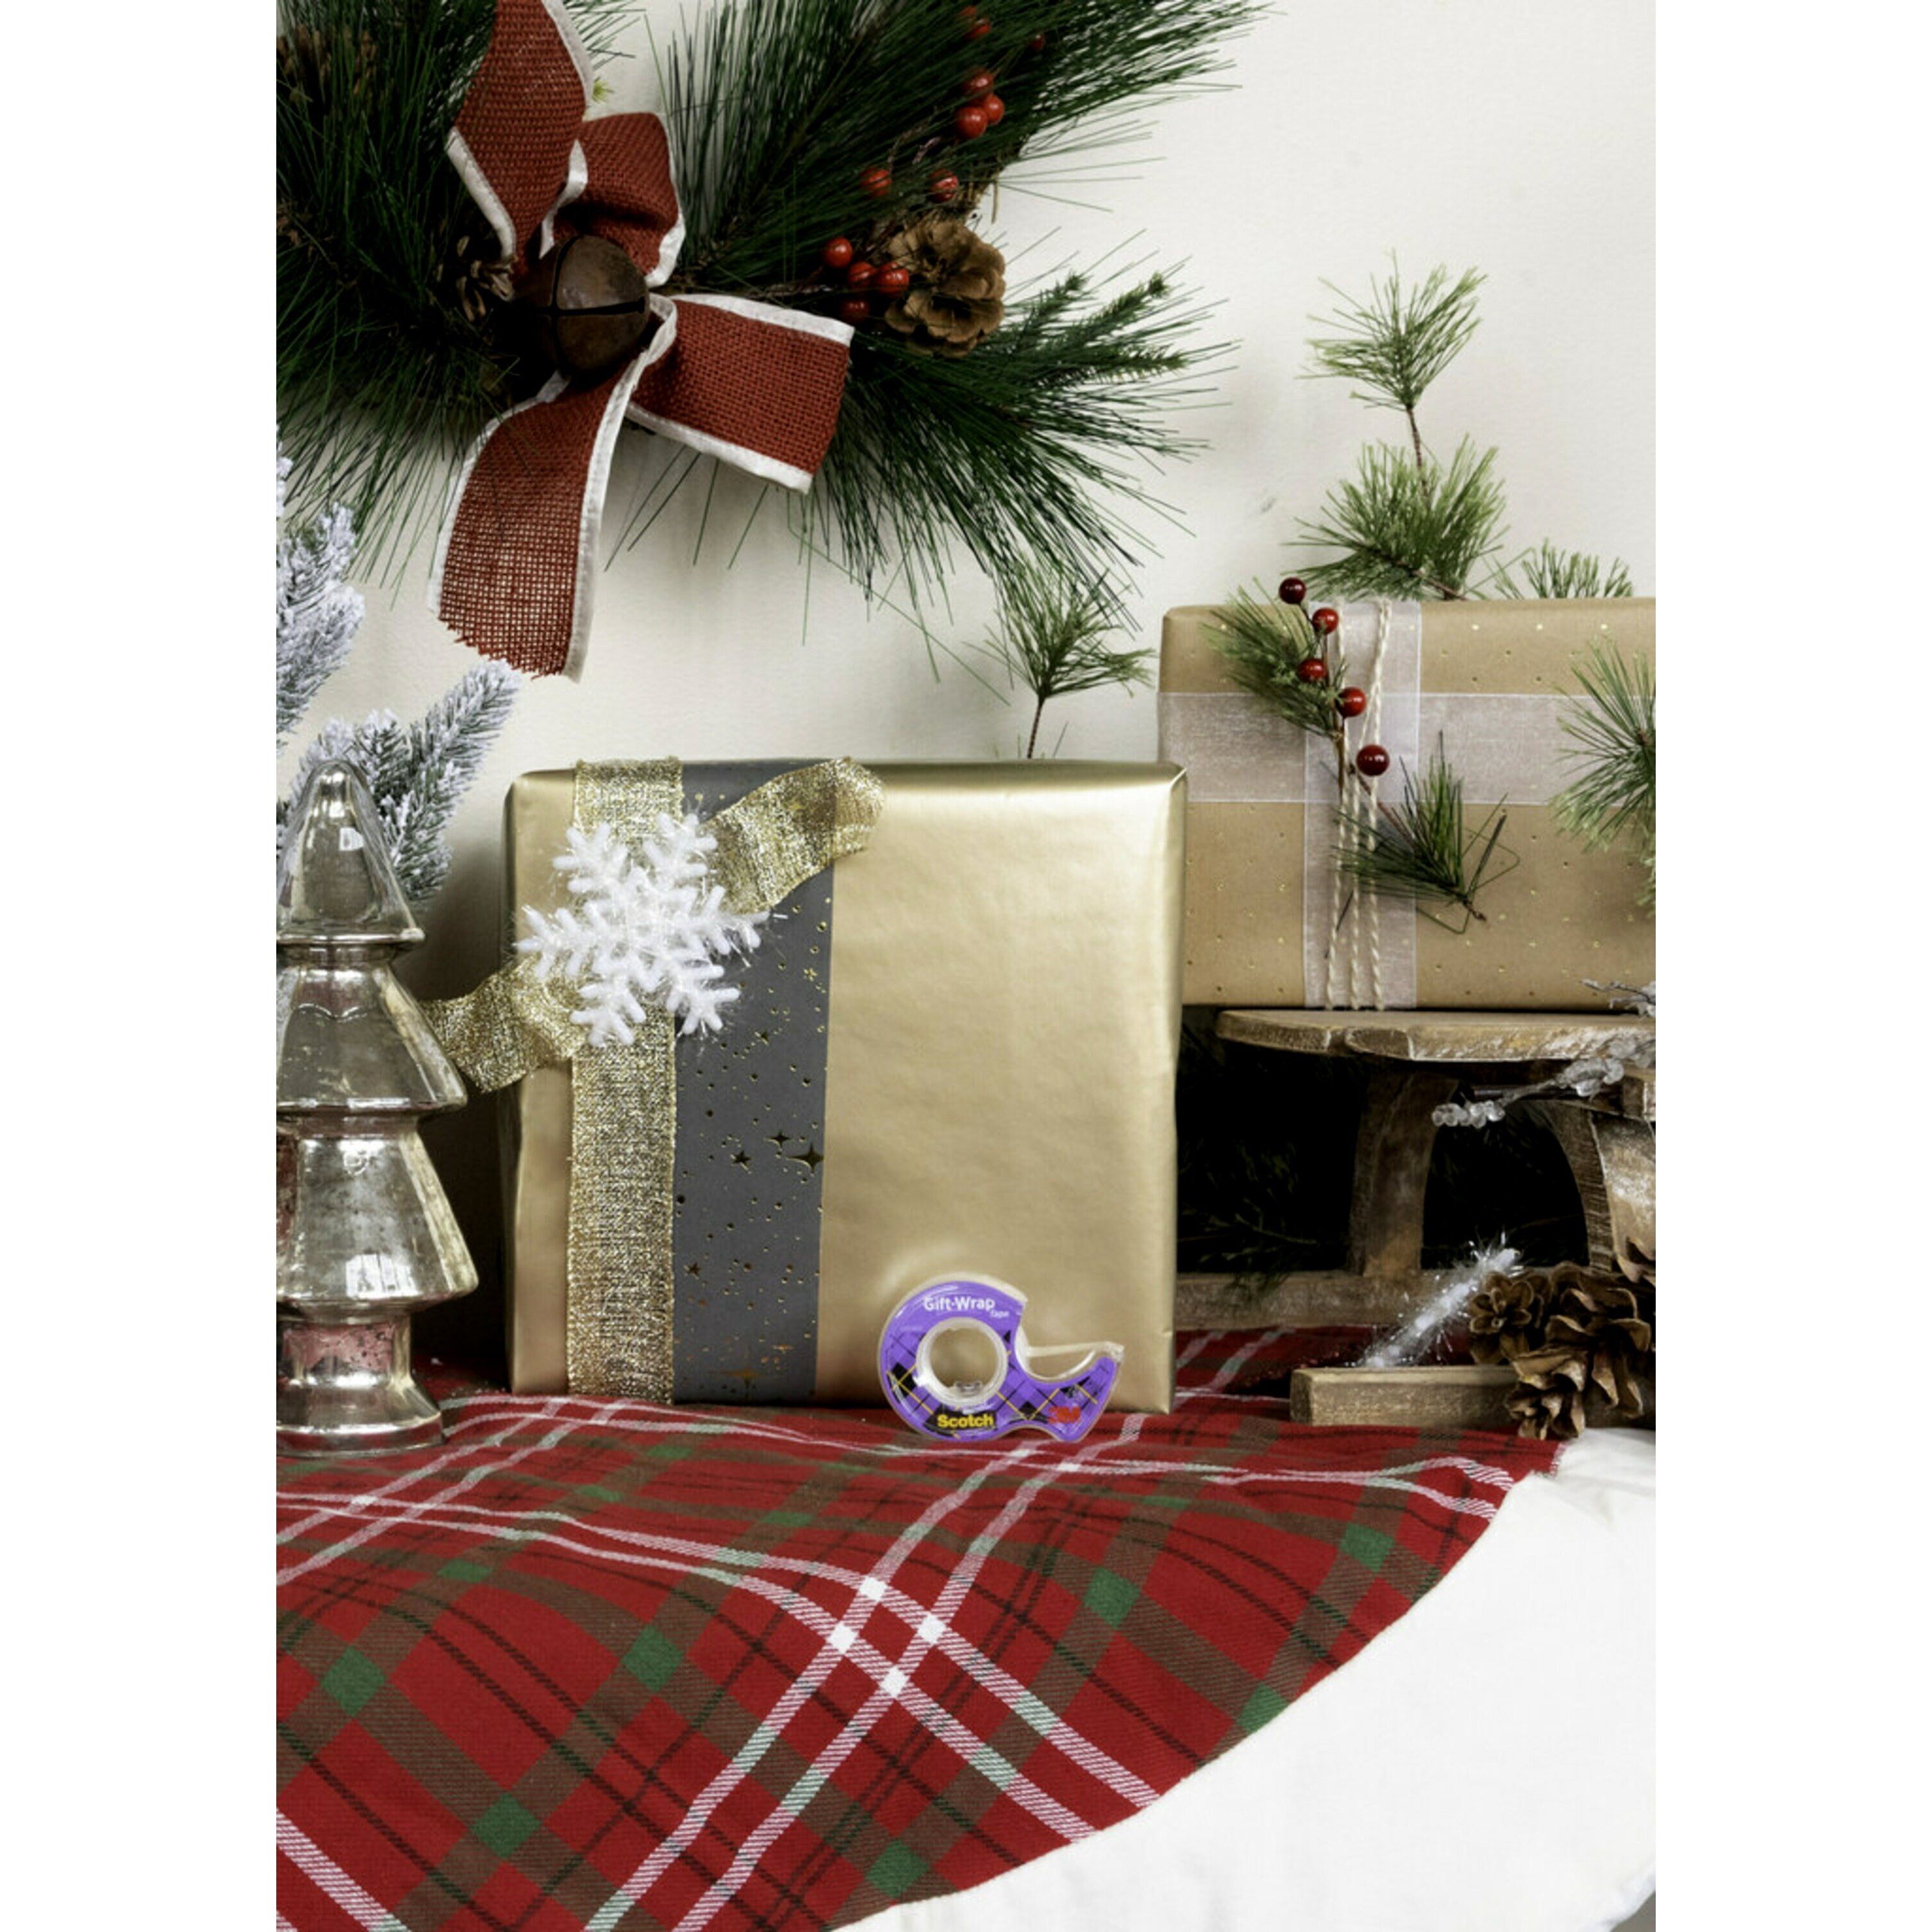 Scotch Gift Wrap Tape, 3 Rolls, The Go-To Tape for the Holidays, 3/4 x 300  Inches, Dispensered (311)